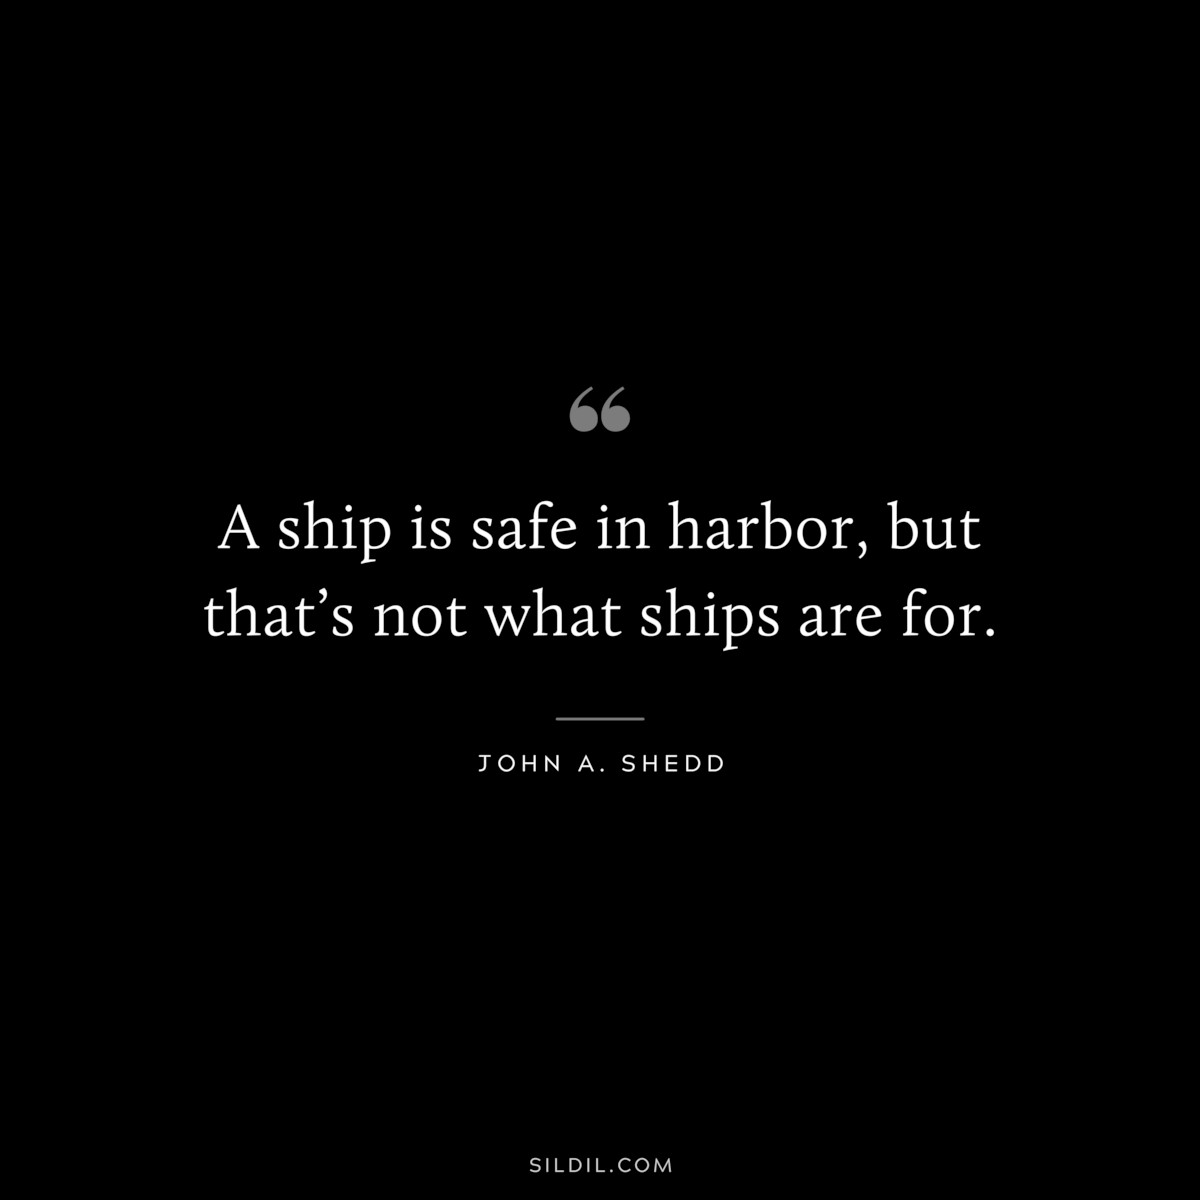 A ship is safe in harbor, but that’s not what ships are for. ― John A. Shedd